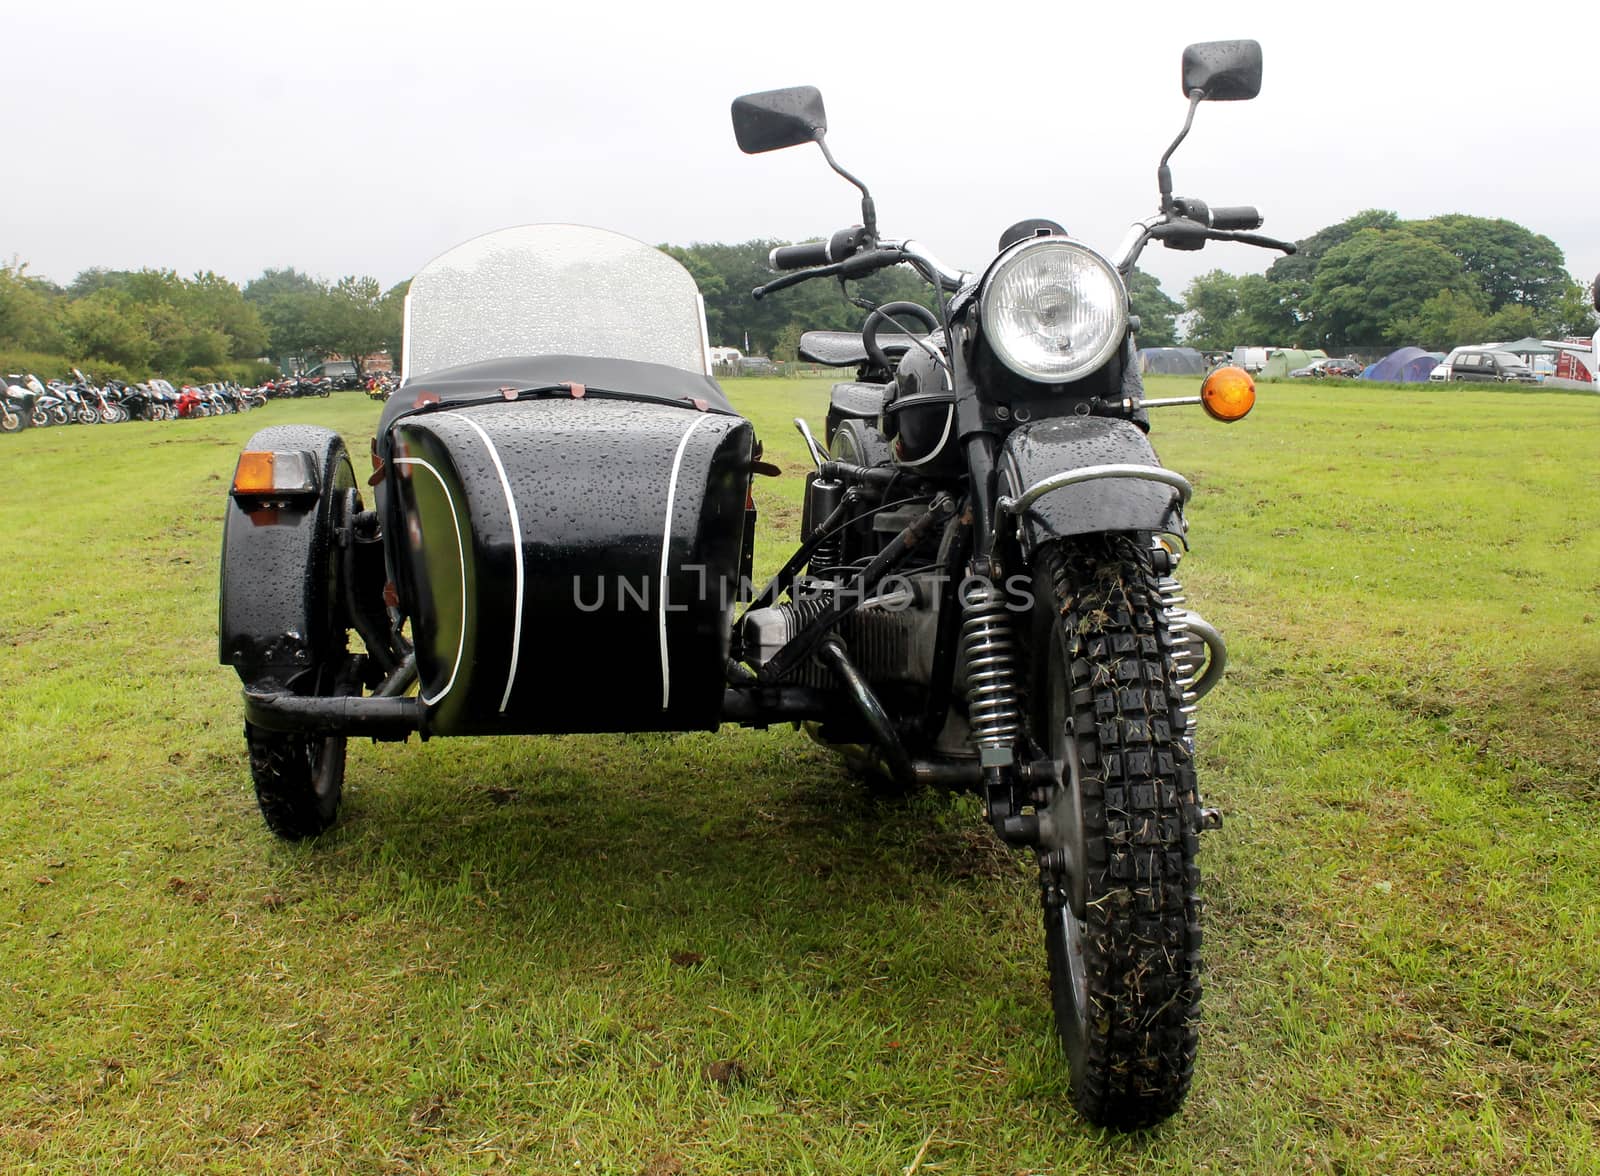 Motorbike and sidecar in a countryside field.